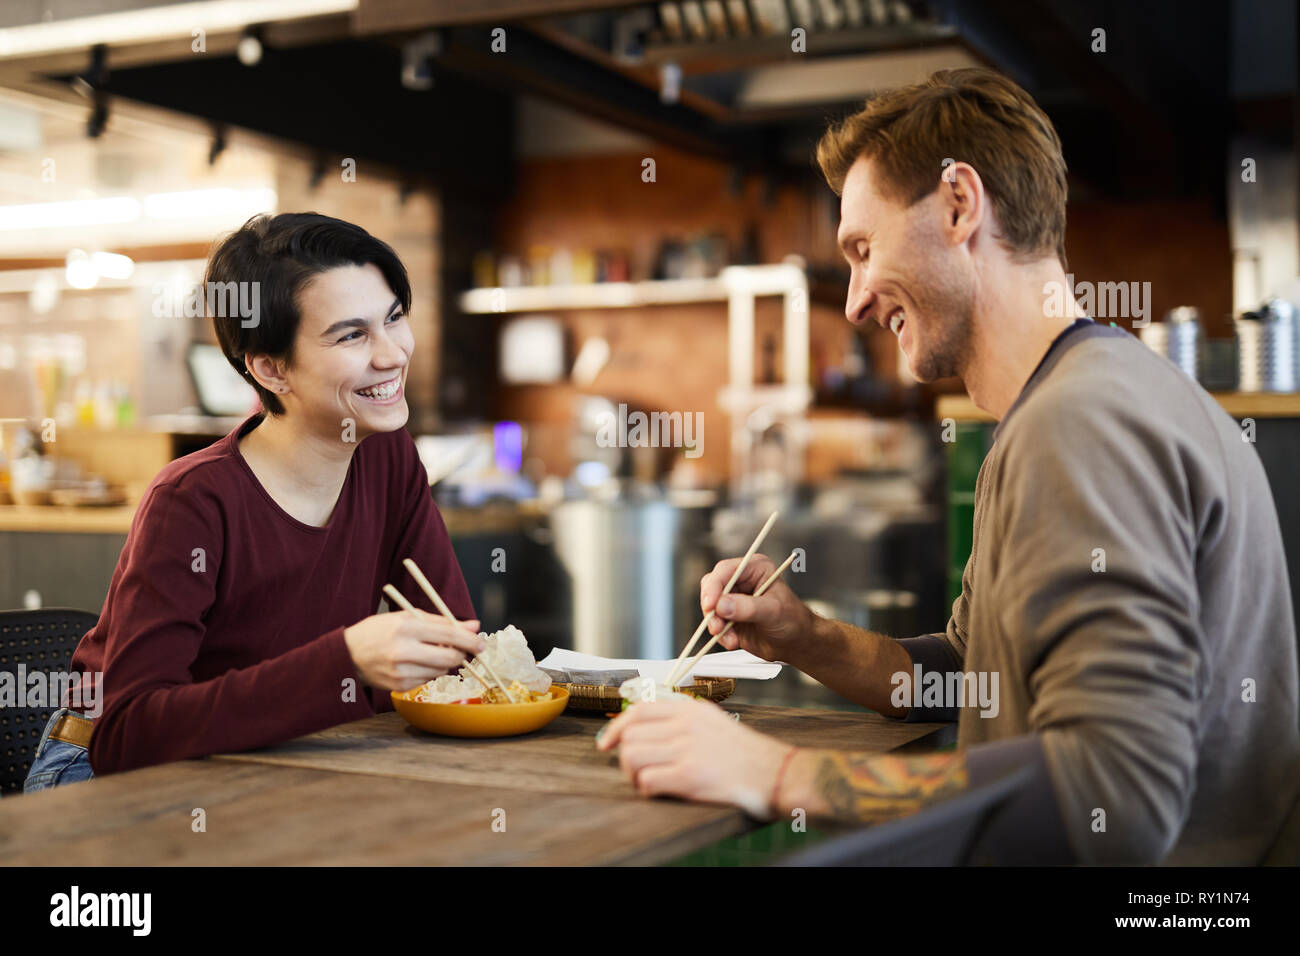 Cheerful Couple in Chinese Food Restaurant Stock Photo